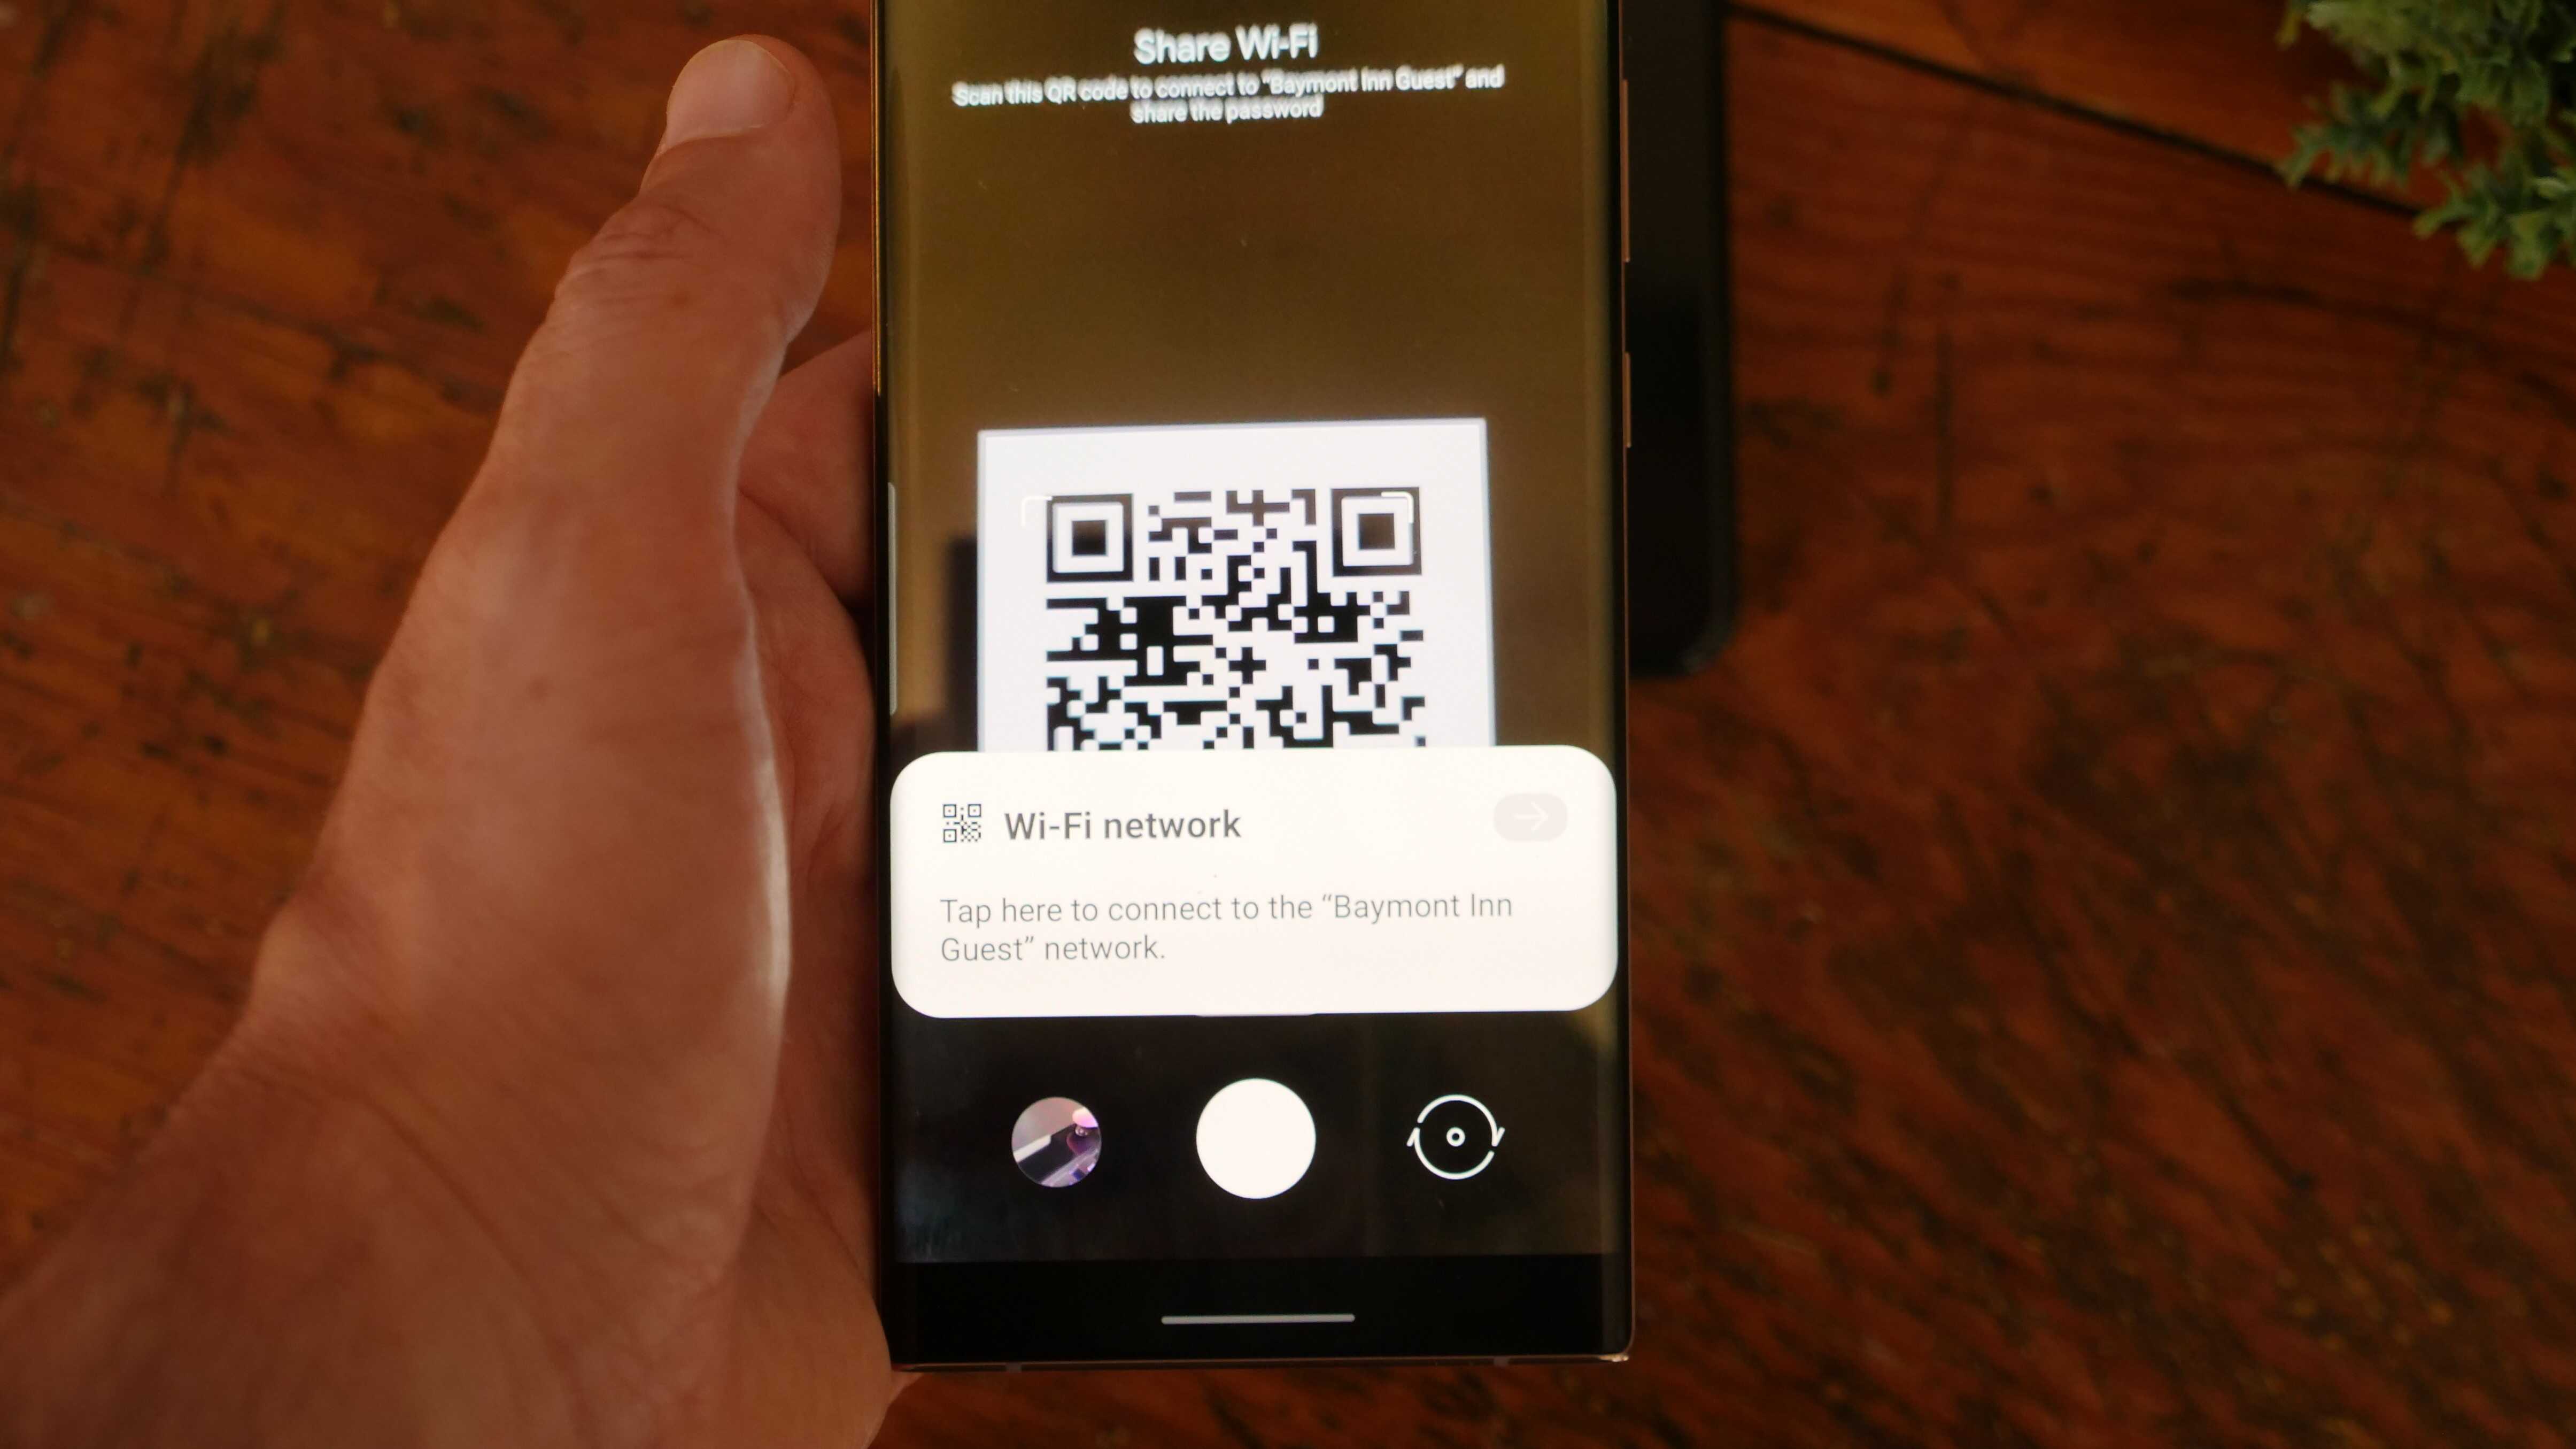 Simplified Steps: Scanning QR Codes On OnePlus 8